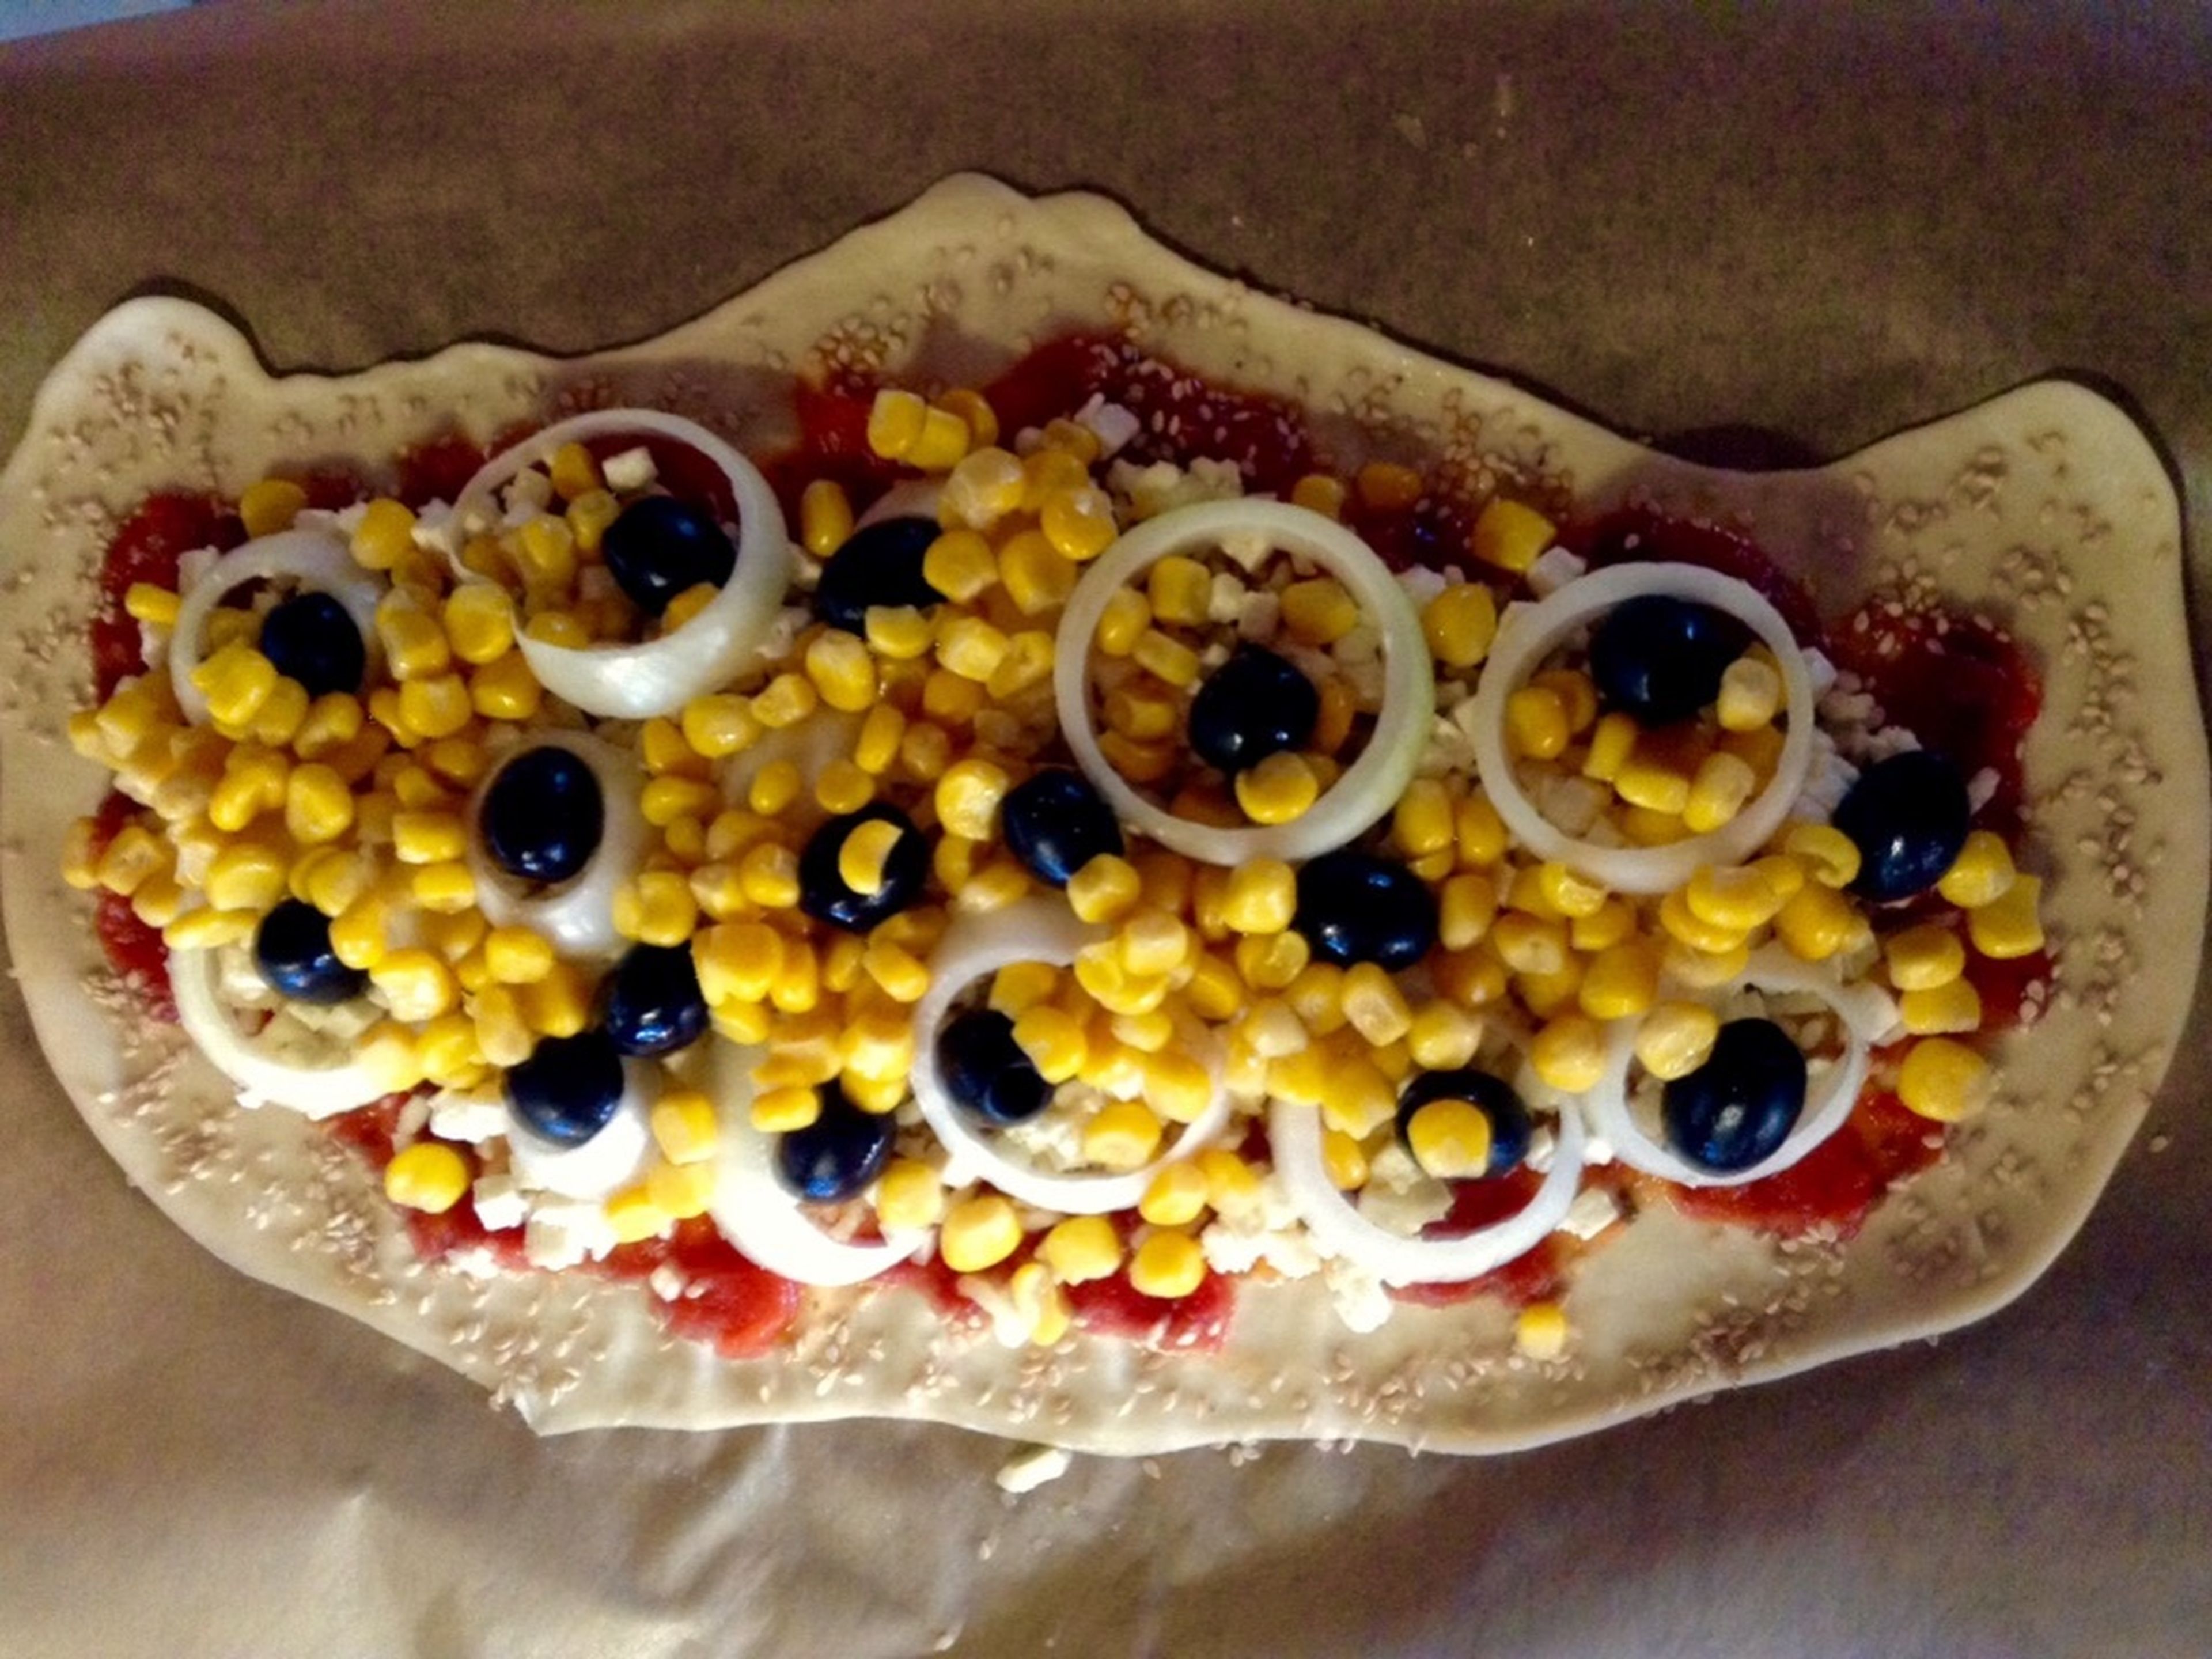 Next, add the toppings. Either put everything on top randomly, or decorate your pizza creatively, as you know—you eat with your eyes first! I started with the sweetcorn (well drained in advance), followed by onion rings (cut beforehand), and finished off with olives in the gaps (well drained).